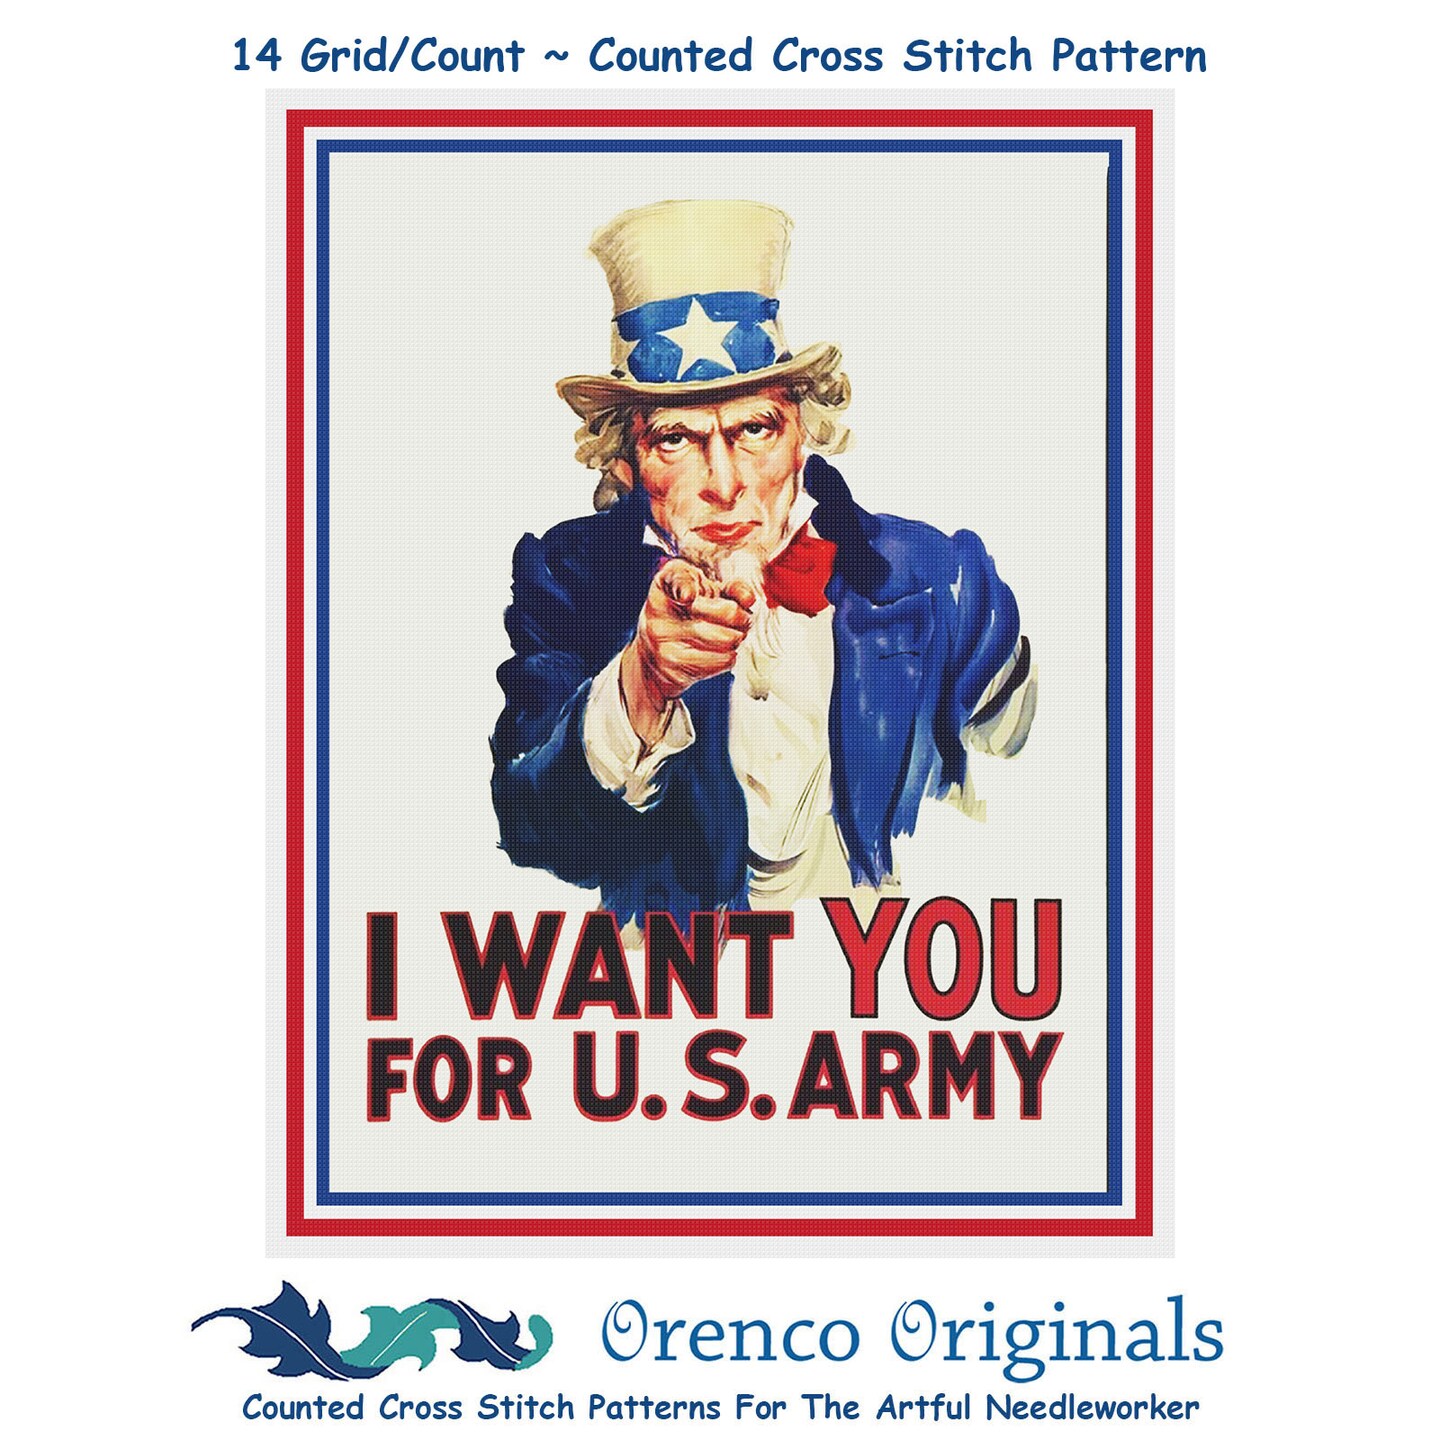 US Army Recruiting Poster Uncle Sam Wants You! Counted Cross Stitch Pattern